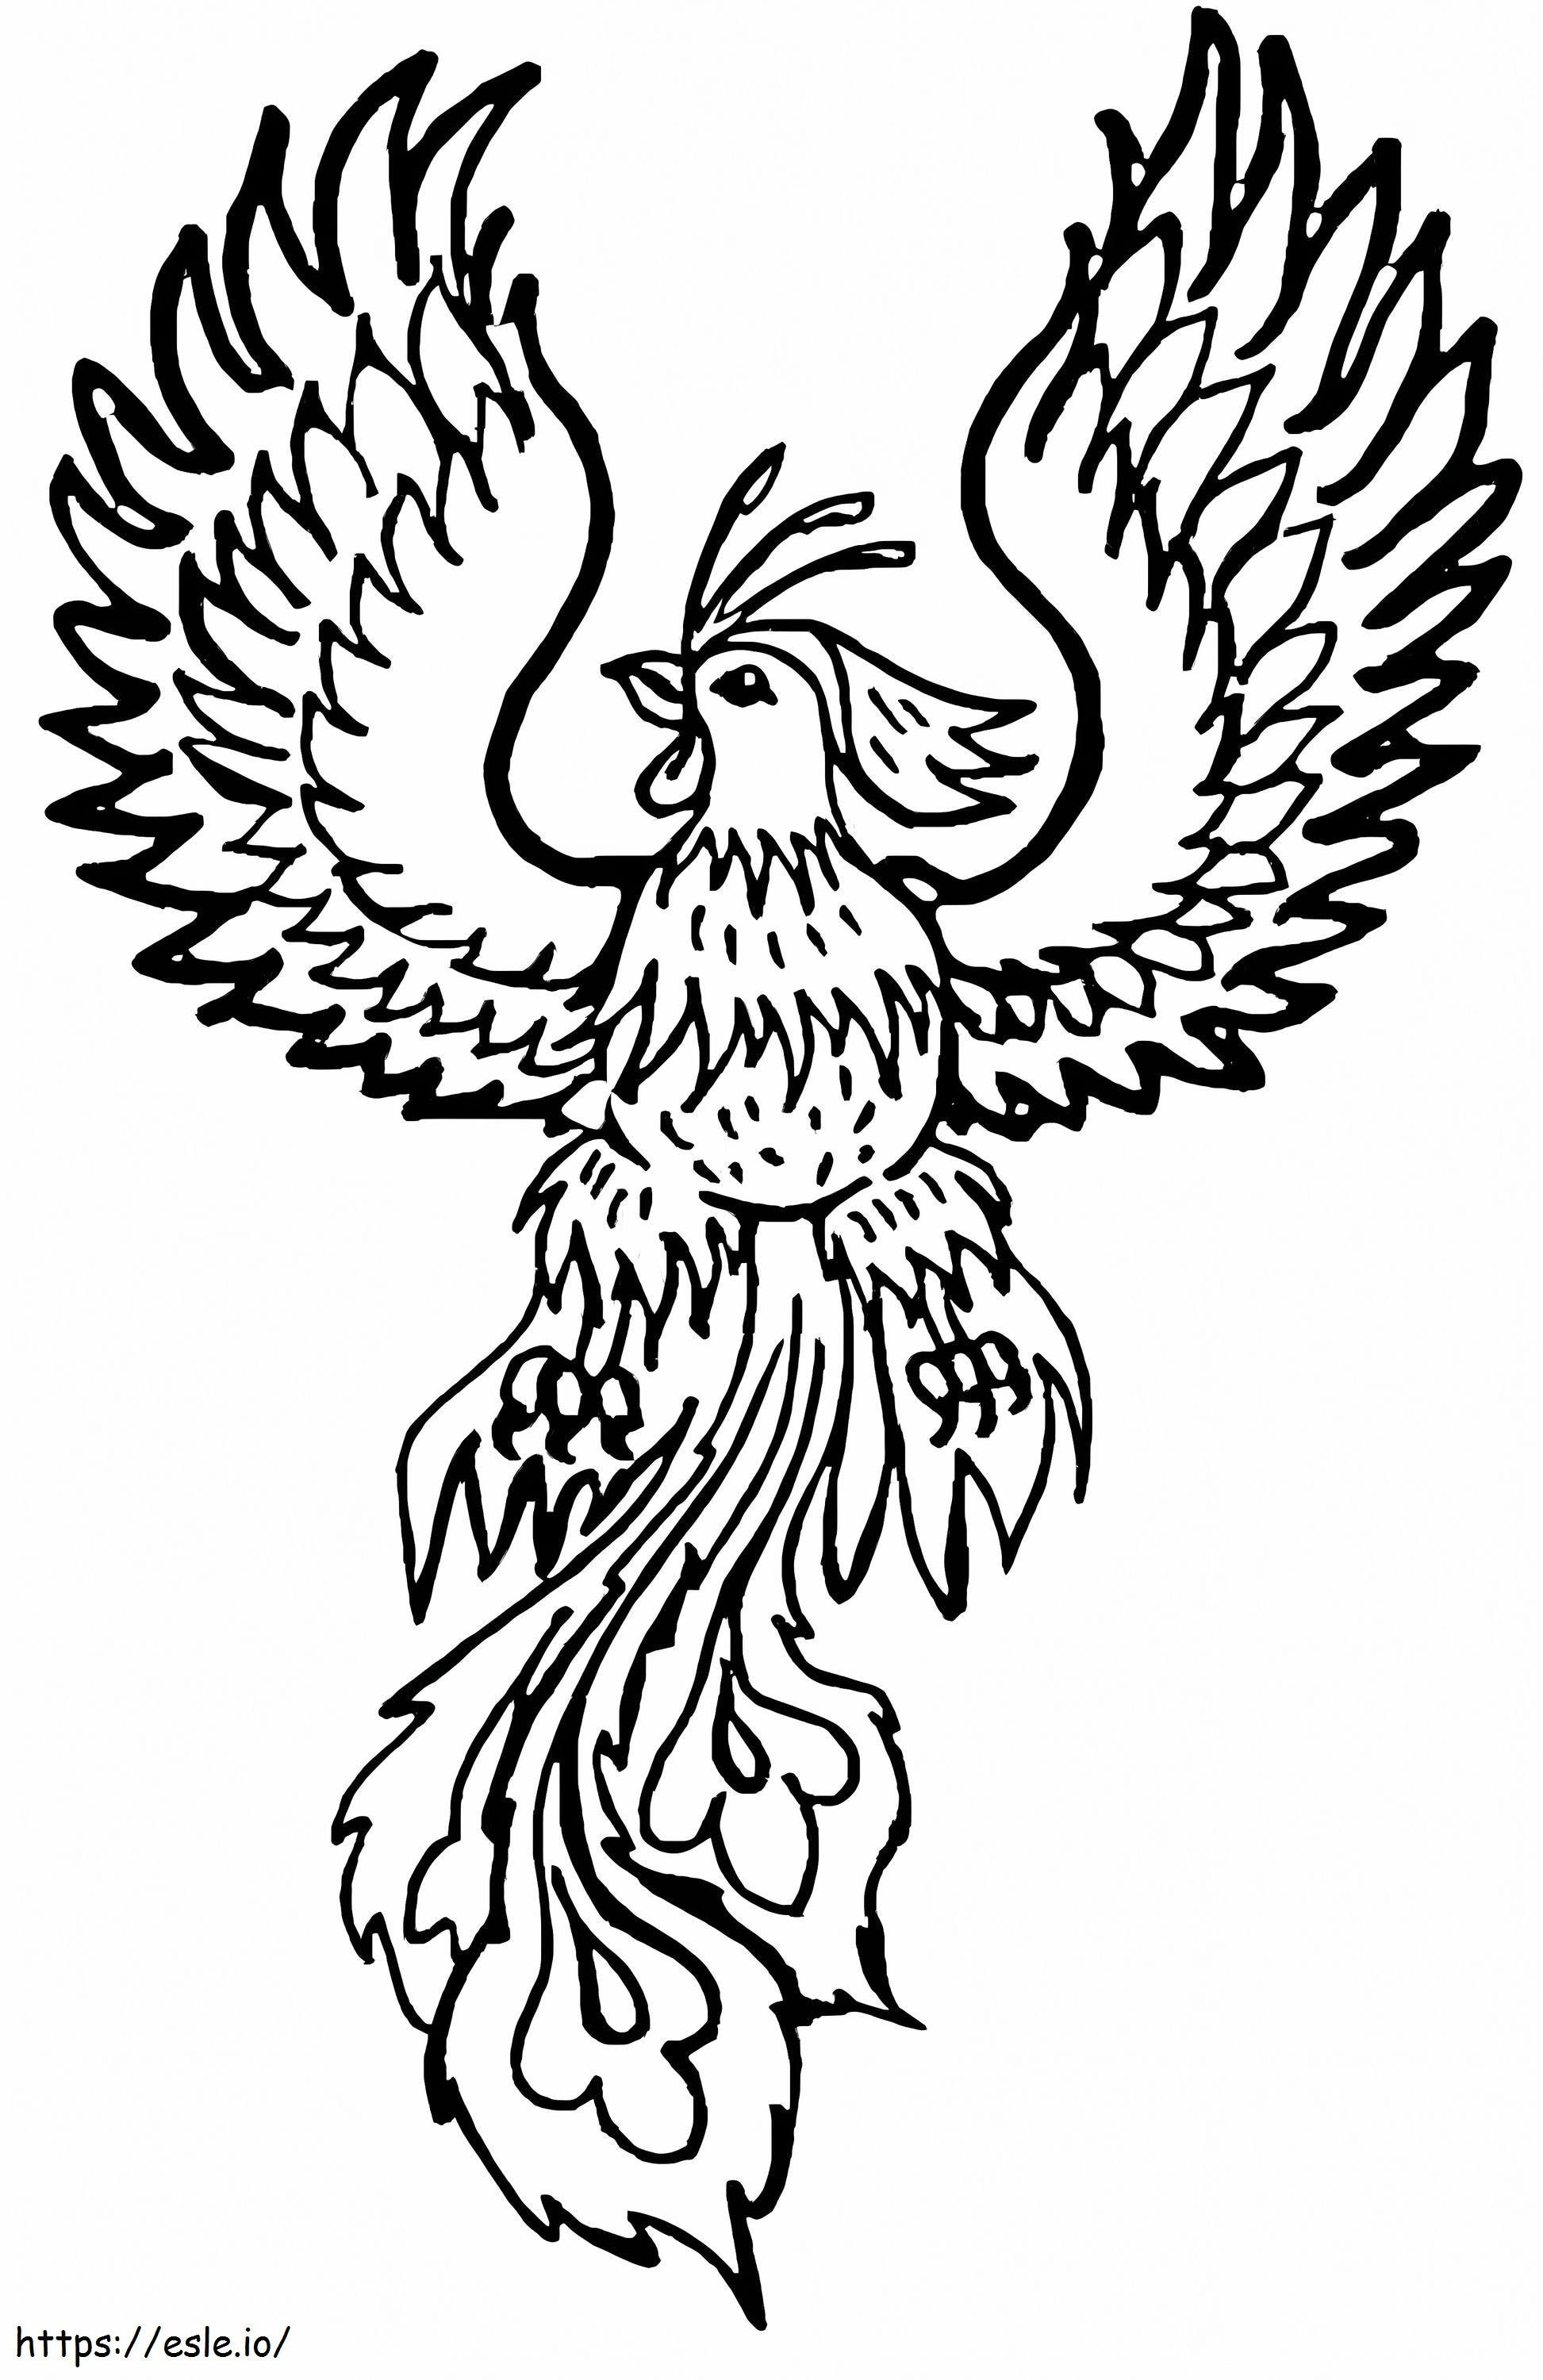 Free Phoenix coloring page